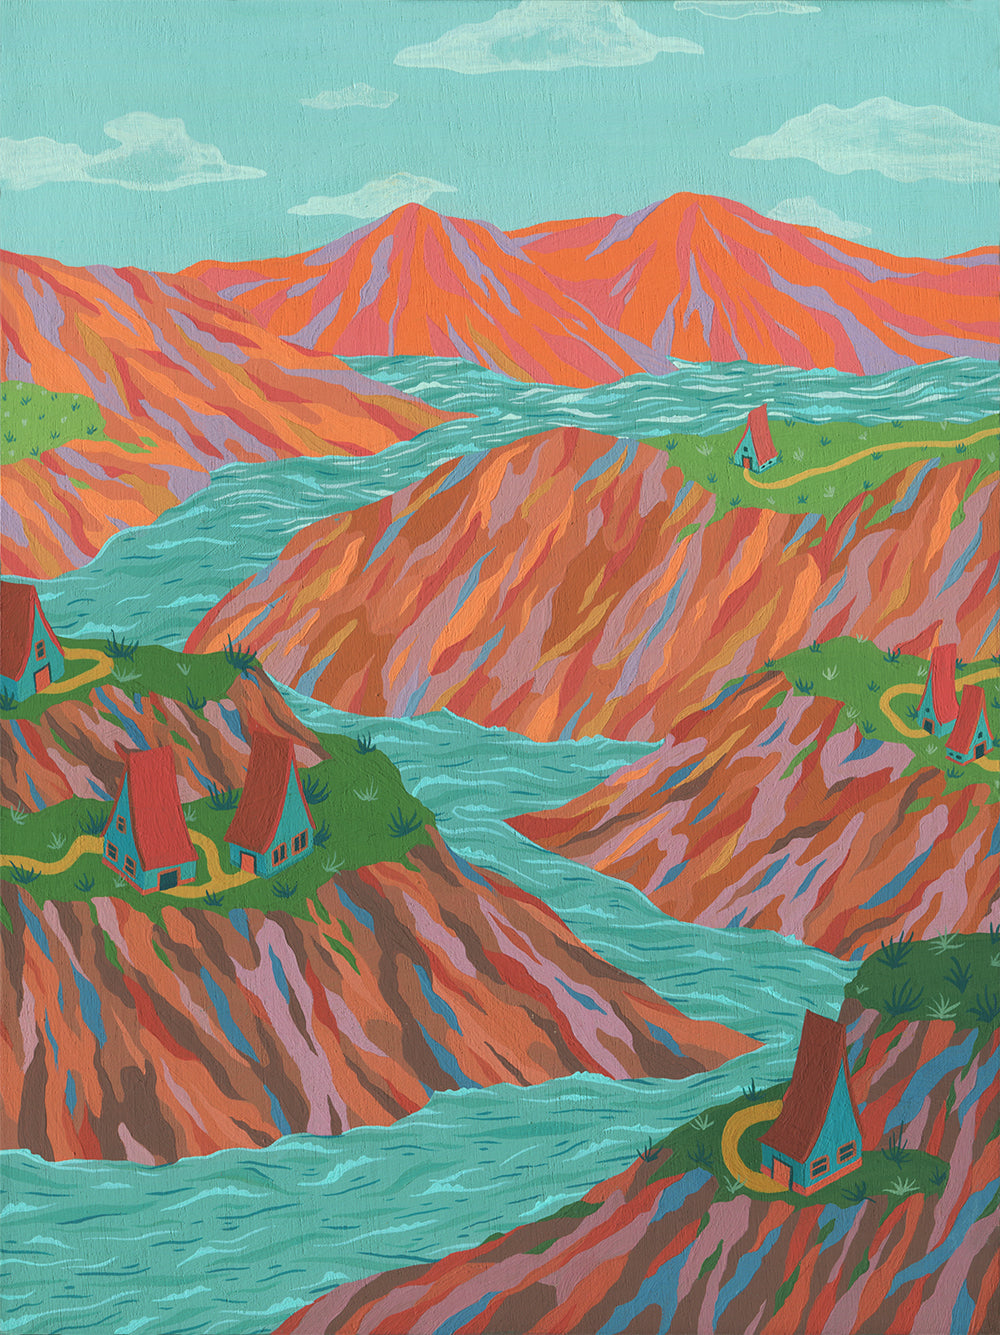 River Through the Painted Hills - Original Painting